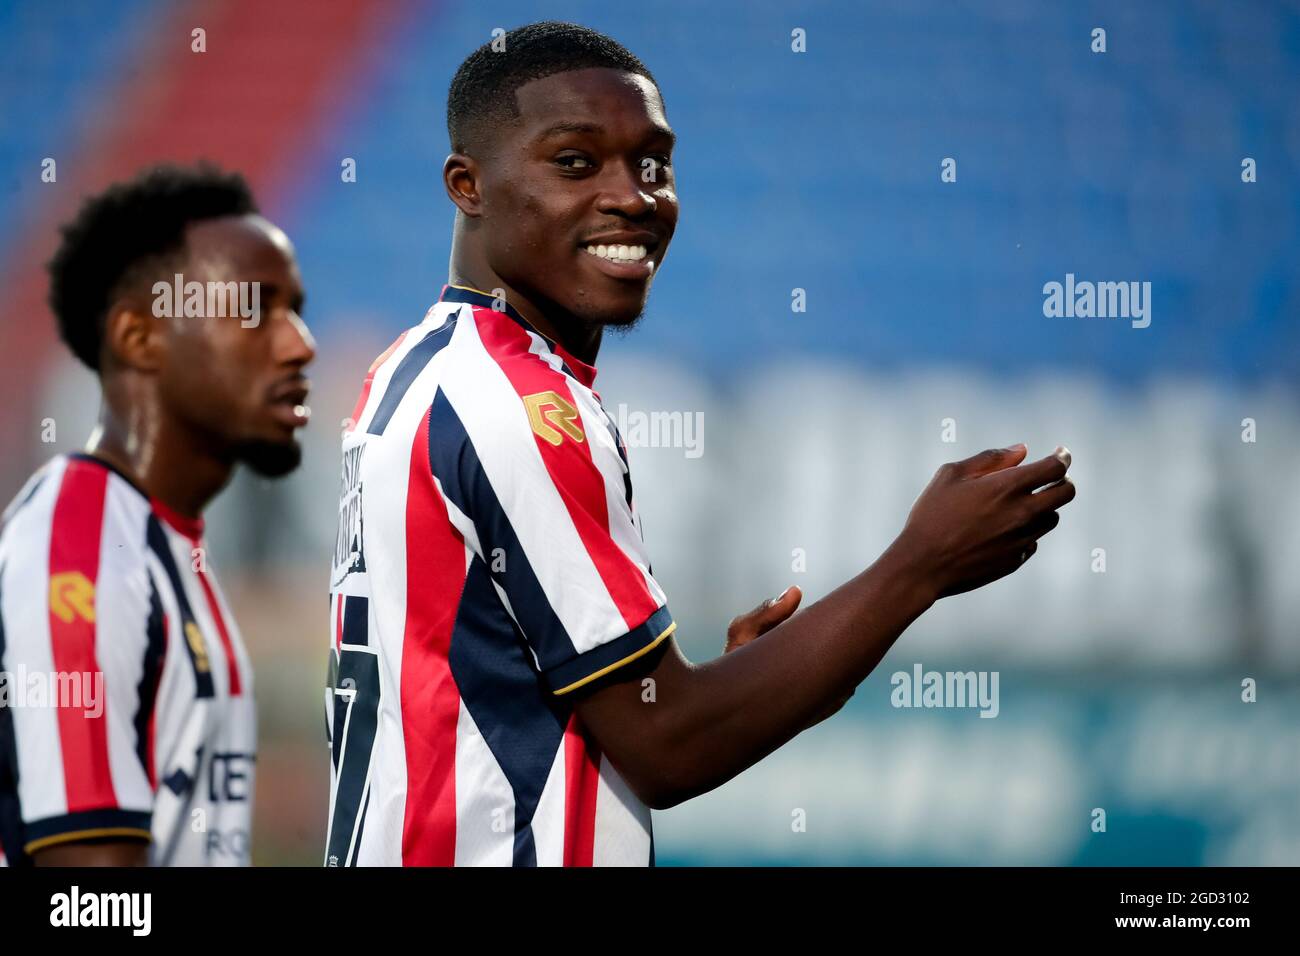 TILBURG, NETHERLANDS - AUGUST 10: Derrick Kohn of Willem II during the Pre-season Friendly match between Willem II and Royal Excelsior Virton at the Koning Willem II Stadion on August 10, 2021 in Tilburg, Netherlands (Photo by Broer van den Boom/Orange Pictures) Stock Photo